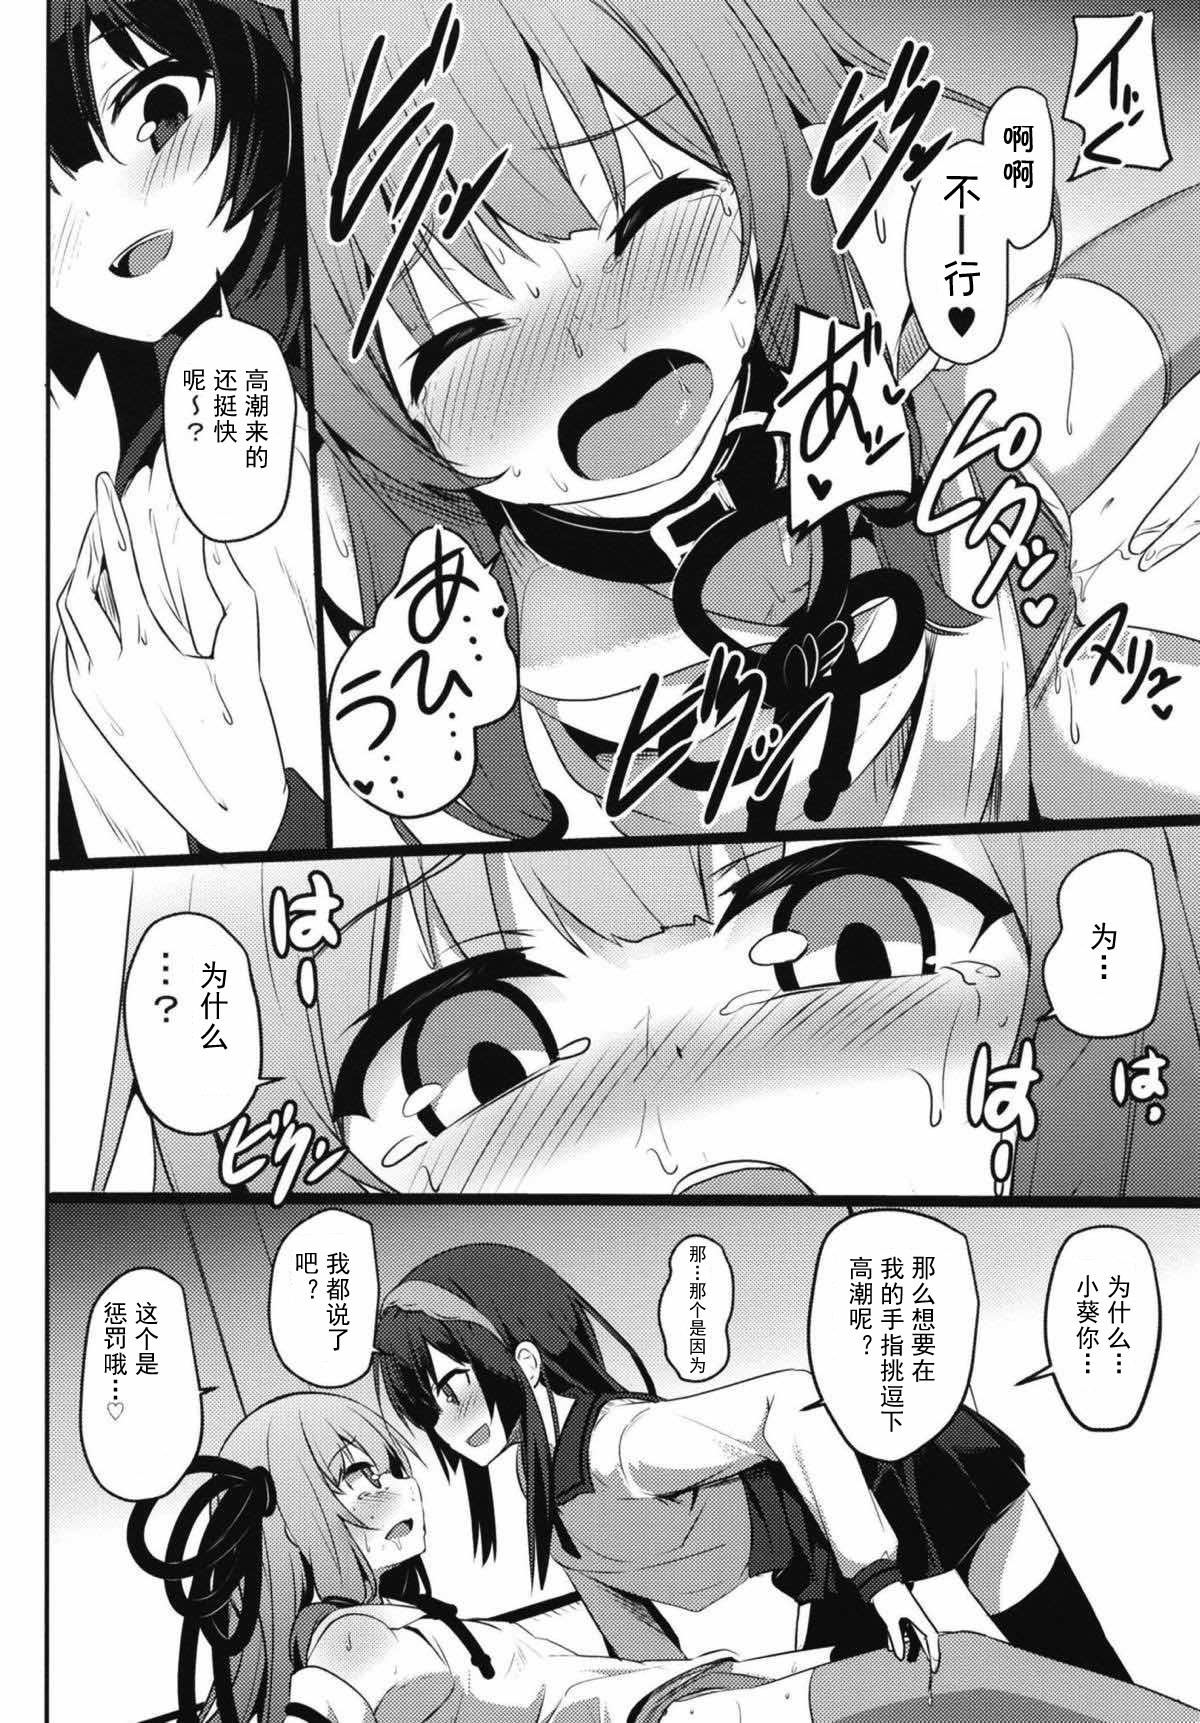 Bj (Kotonoha's Festa 2) [Milk Pudding (Jamcy)] Akane-chan Challenge! 2.5-kaime (VOICEROID) [Chinese] [古早个人汉化] - Voiceroid Freaky - Page 10